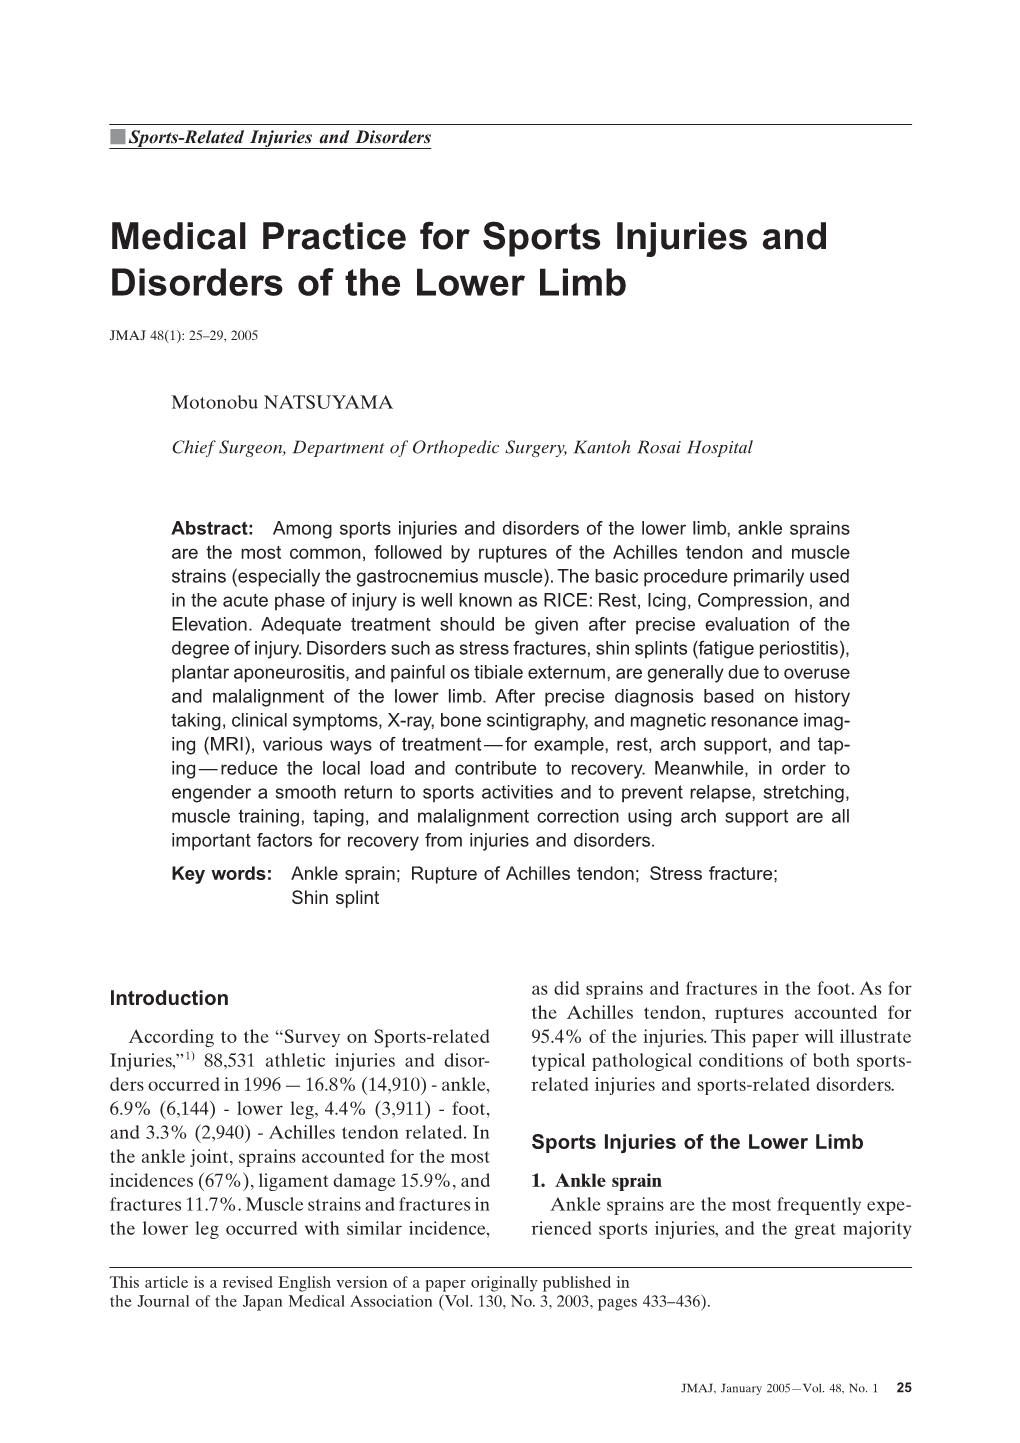 Medical Practice for Sports Injuries and Disorders of the Lower Limb